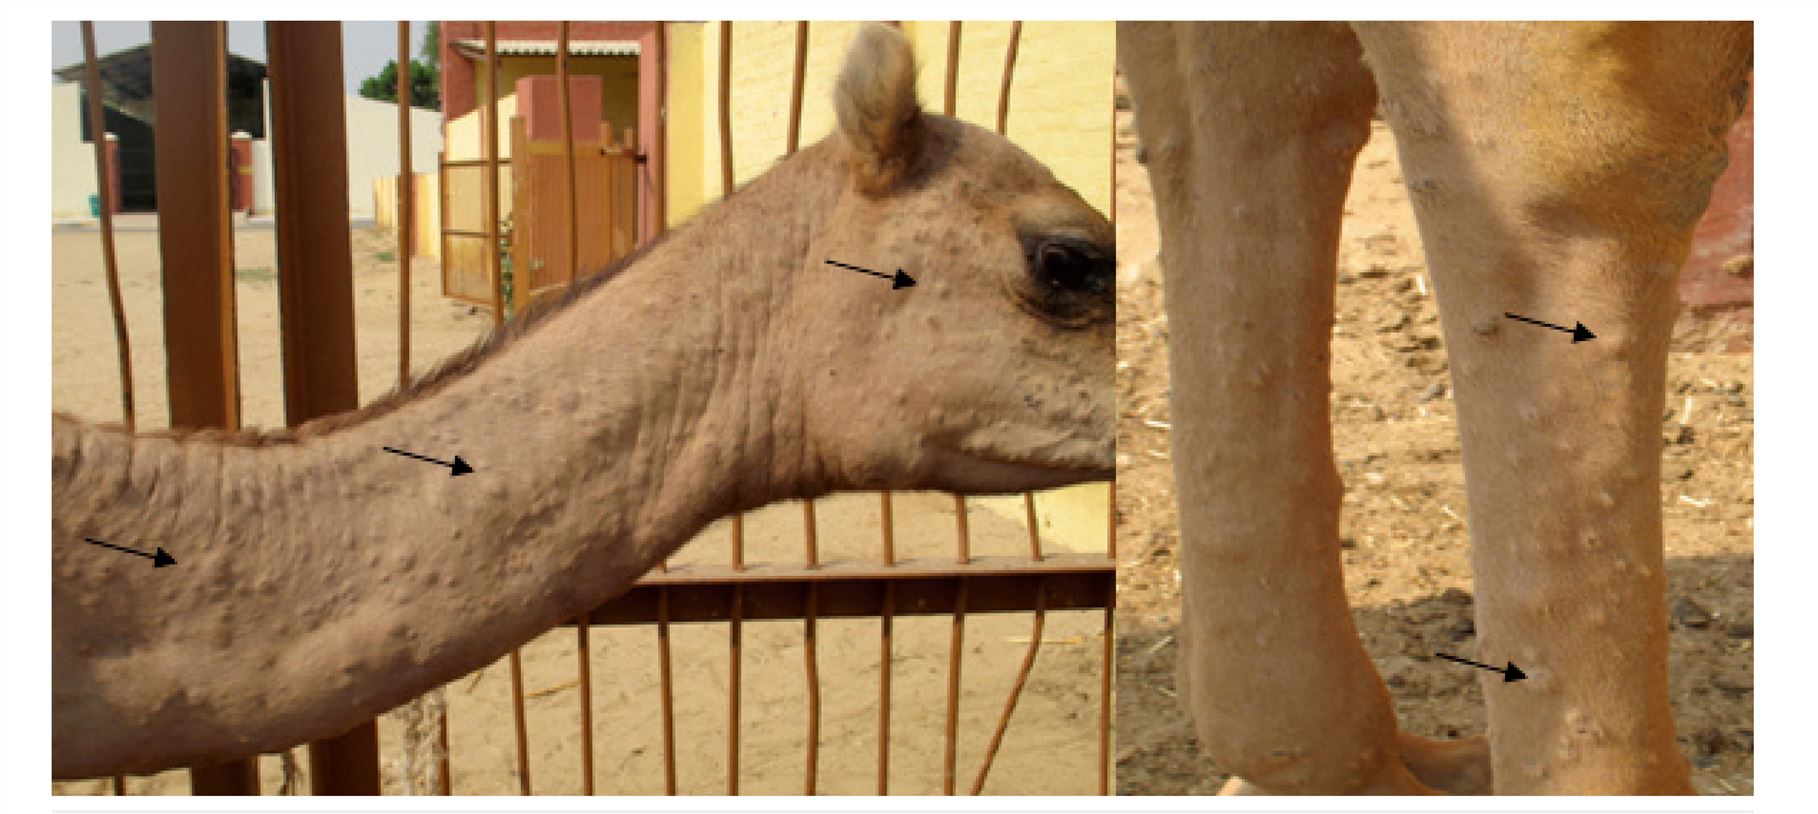 Camelpox infection in camels